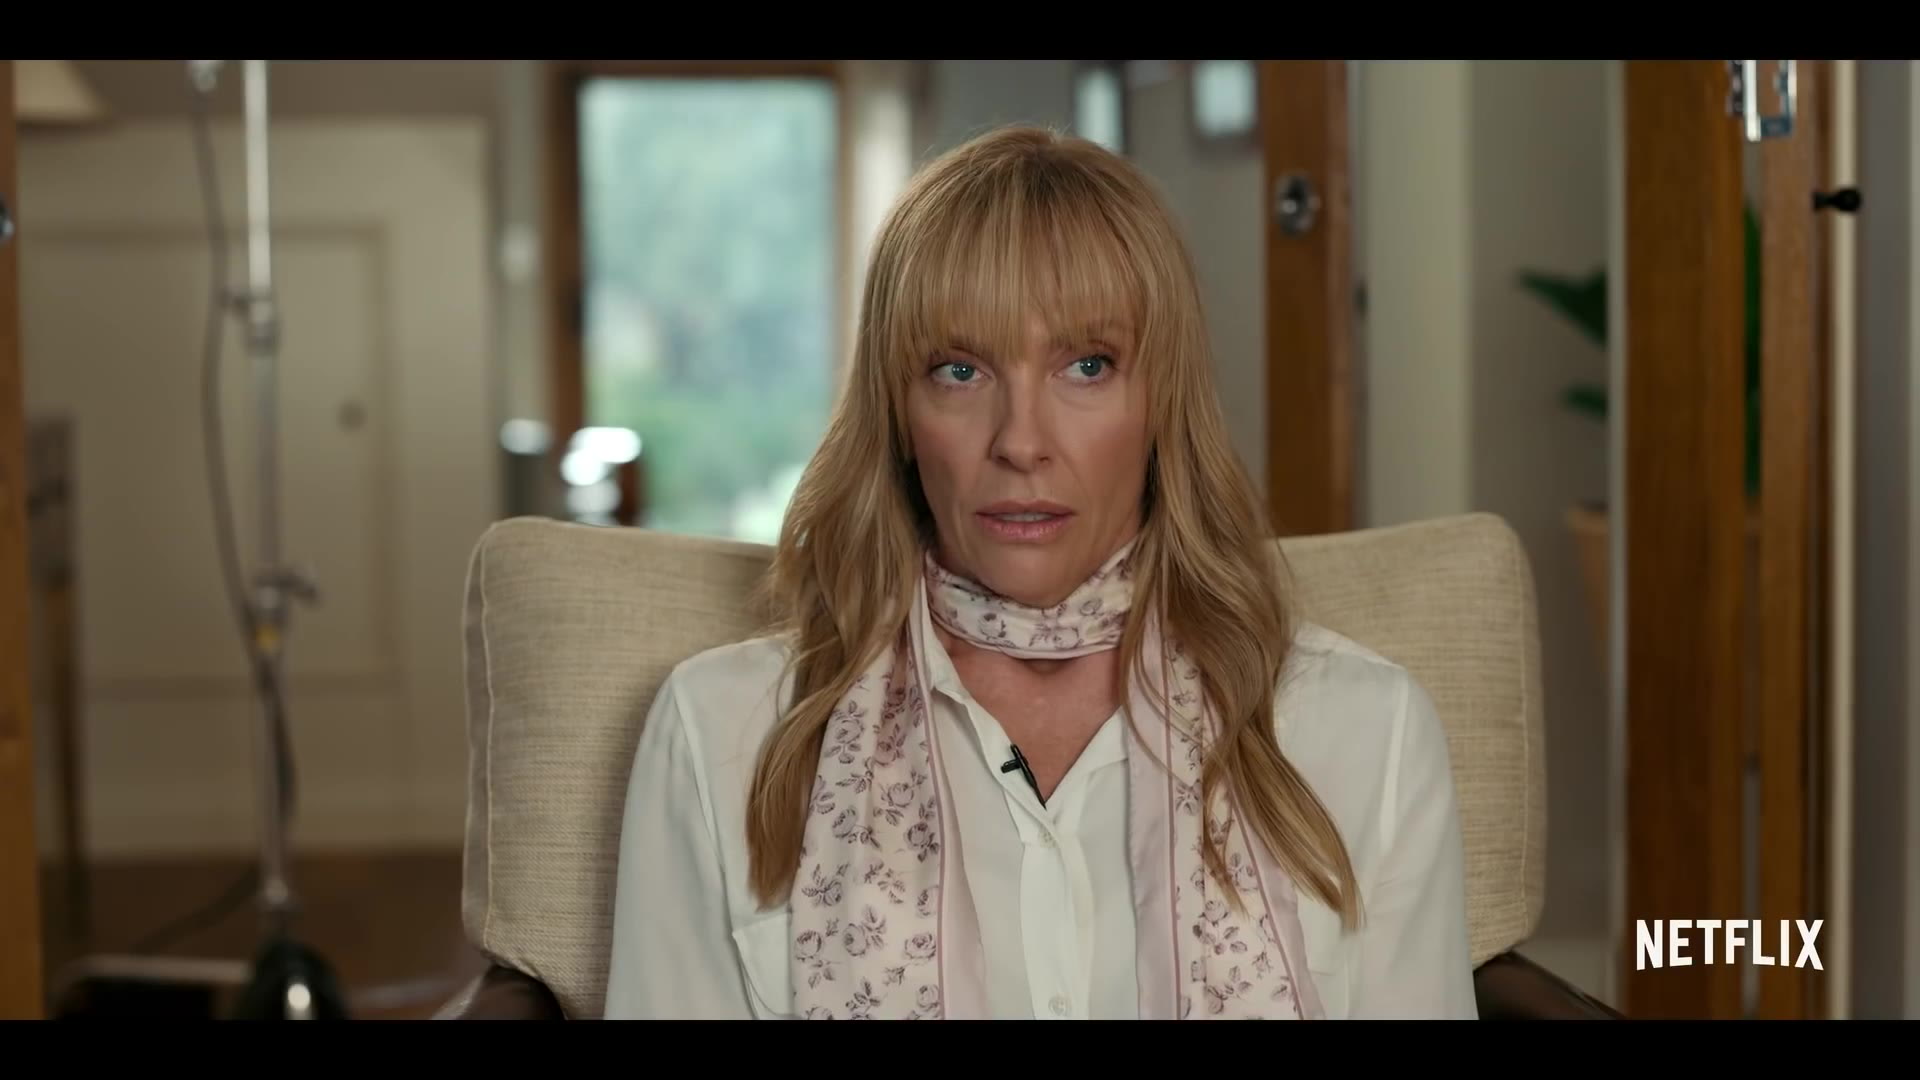 Pieces Of Her' Review: New Thriller On Netflix Starring Toni Collette